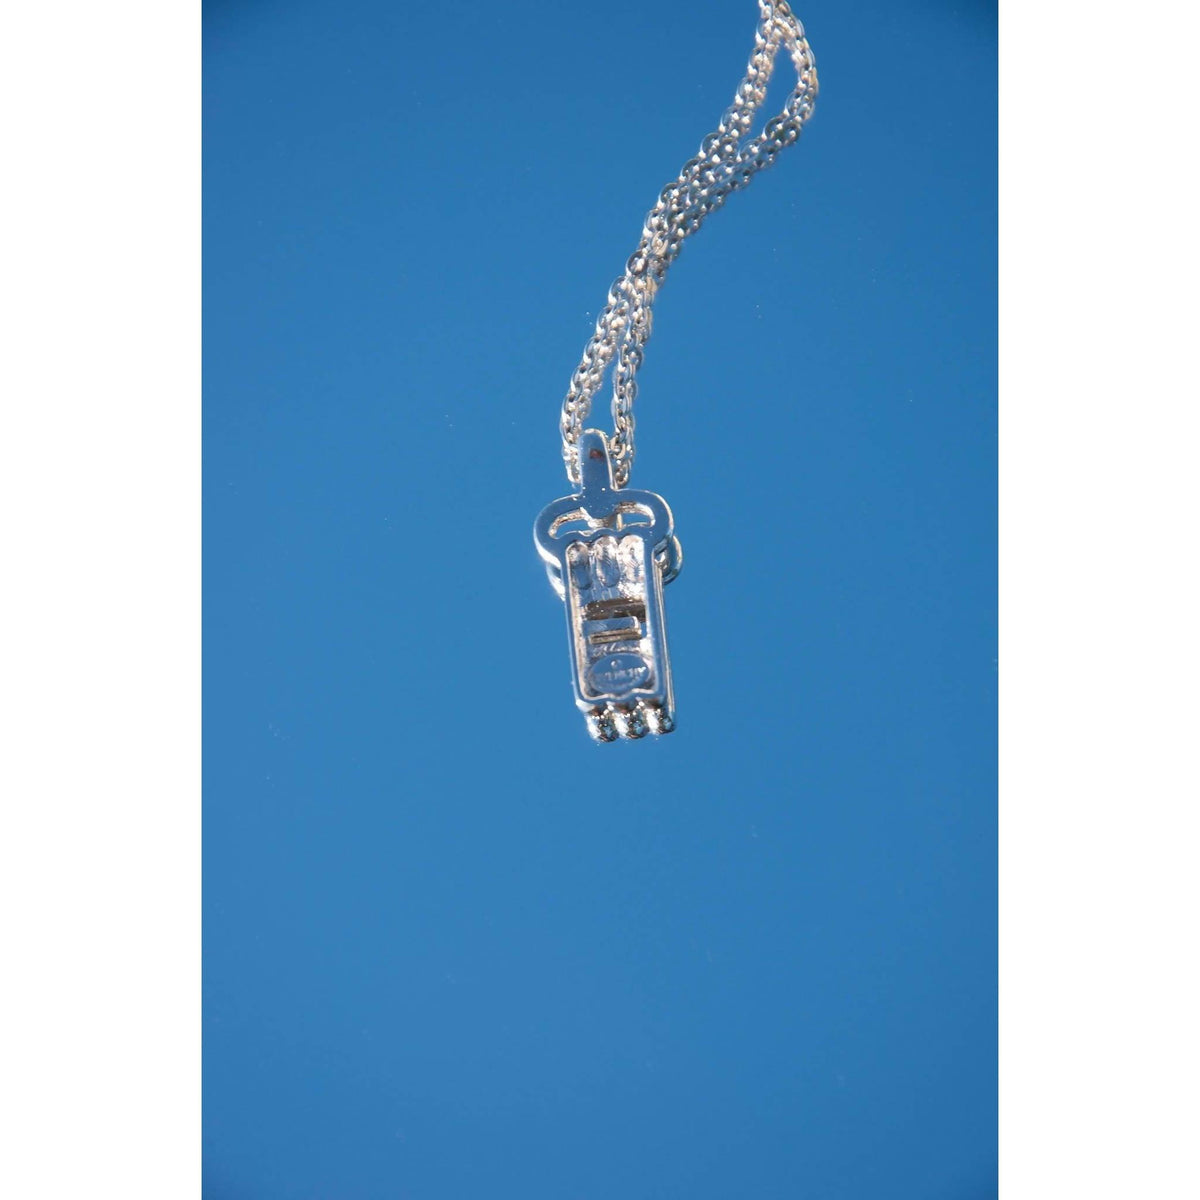 GIVENCHY Small Silver Logo Necklace - theREMODA